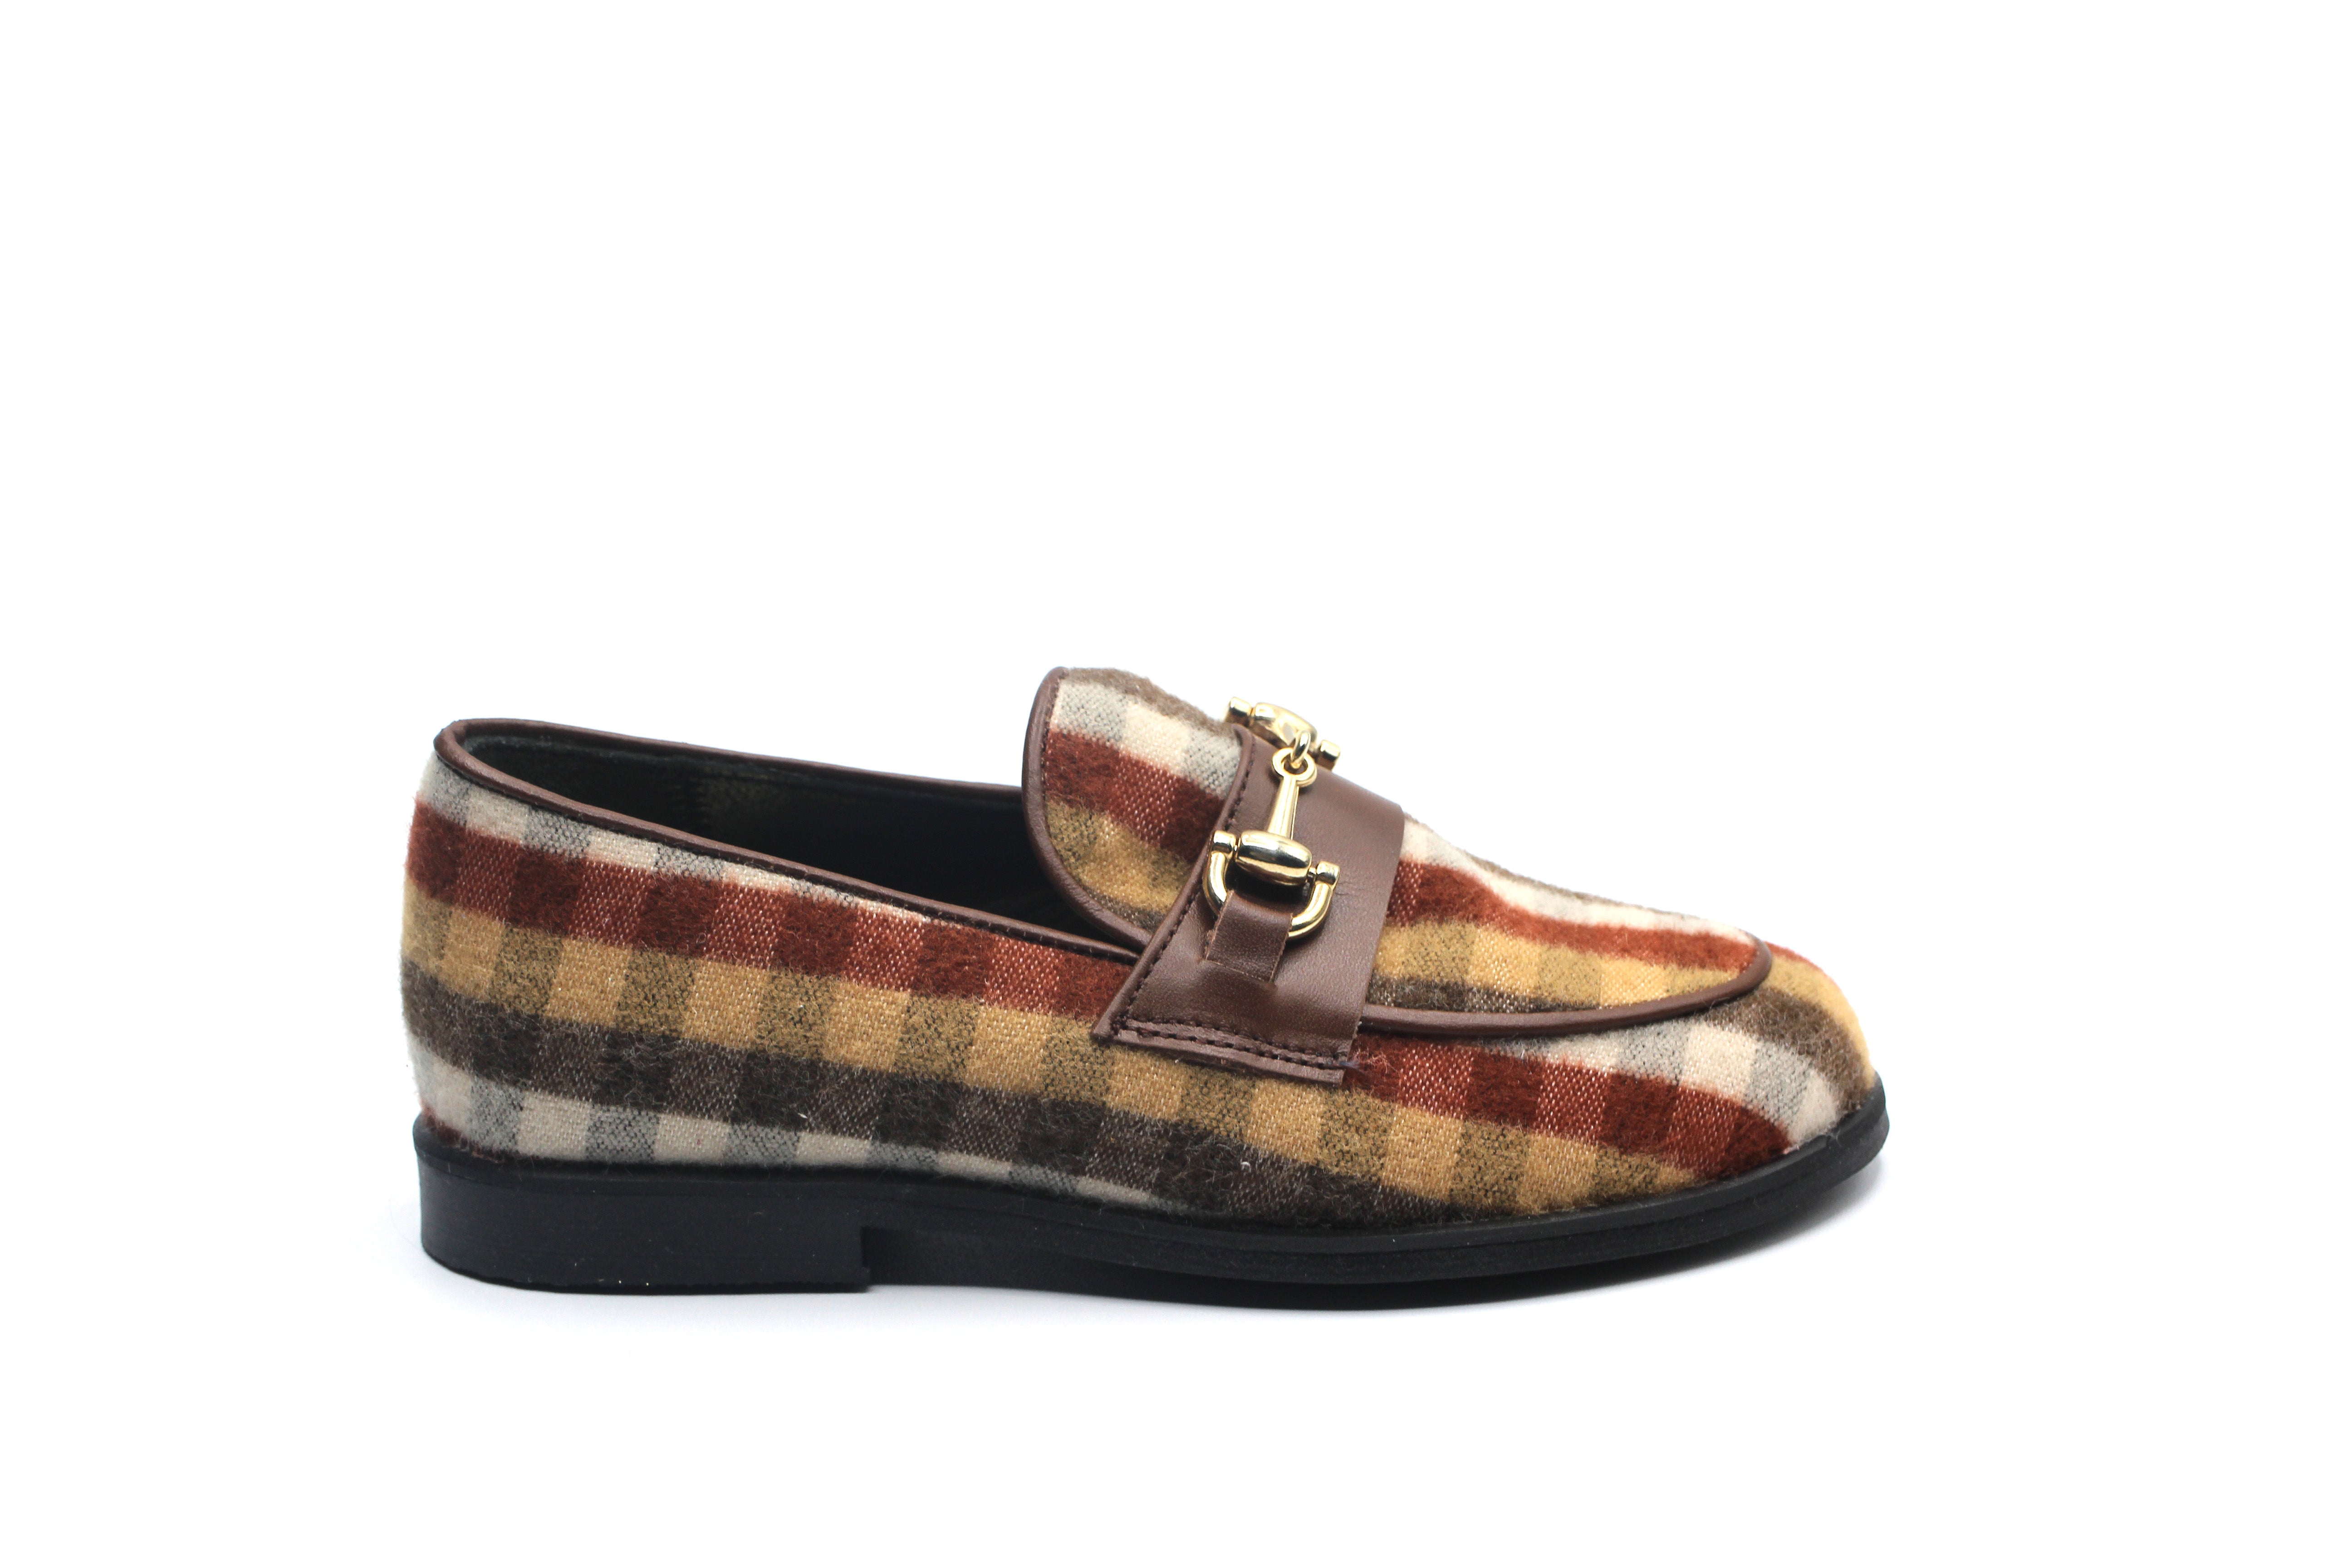 LMDI Brown Plaid Leather Buckle Loafer